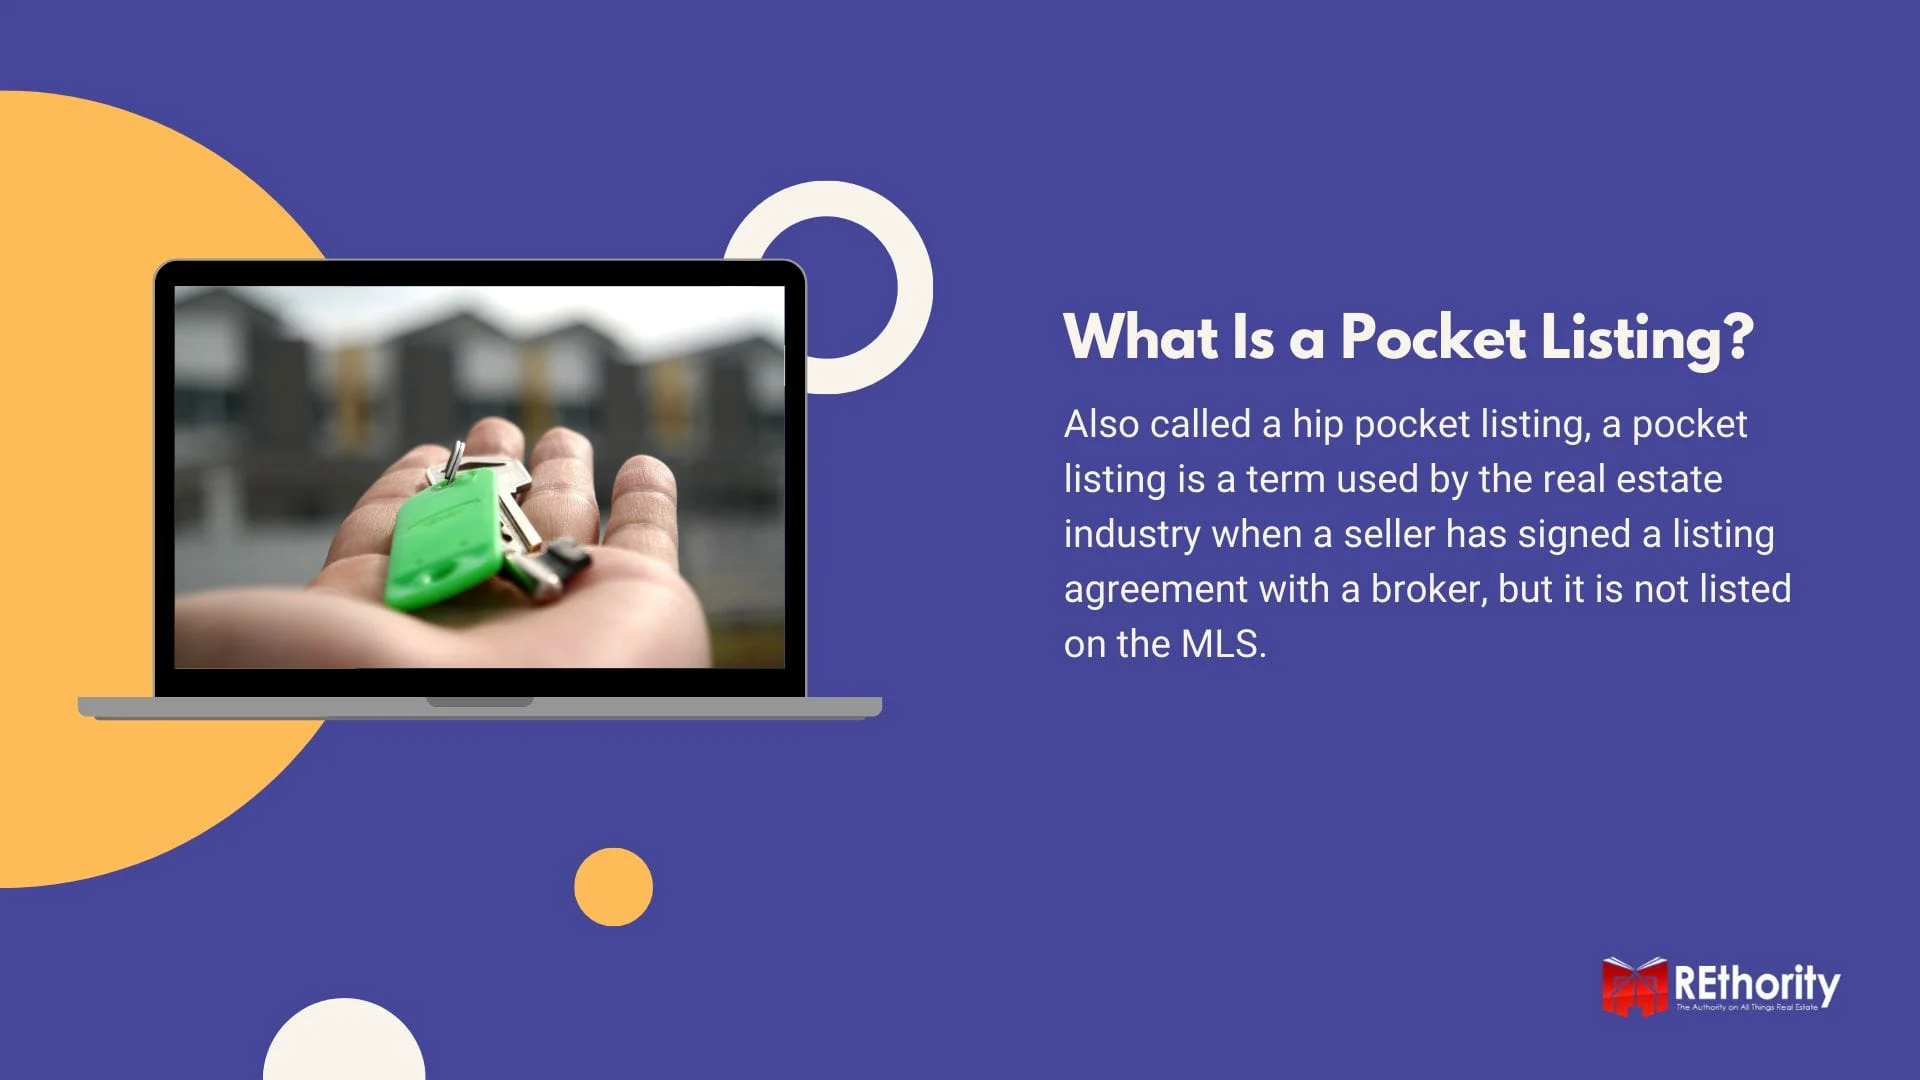 What is a pocket listing graphic explaining the topic against a blue background